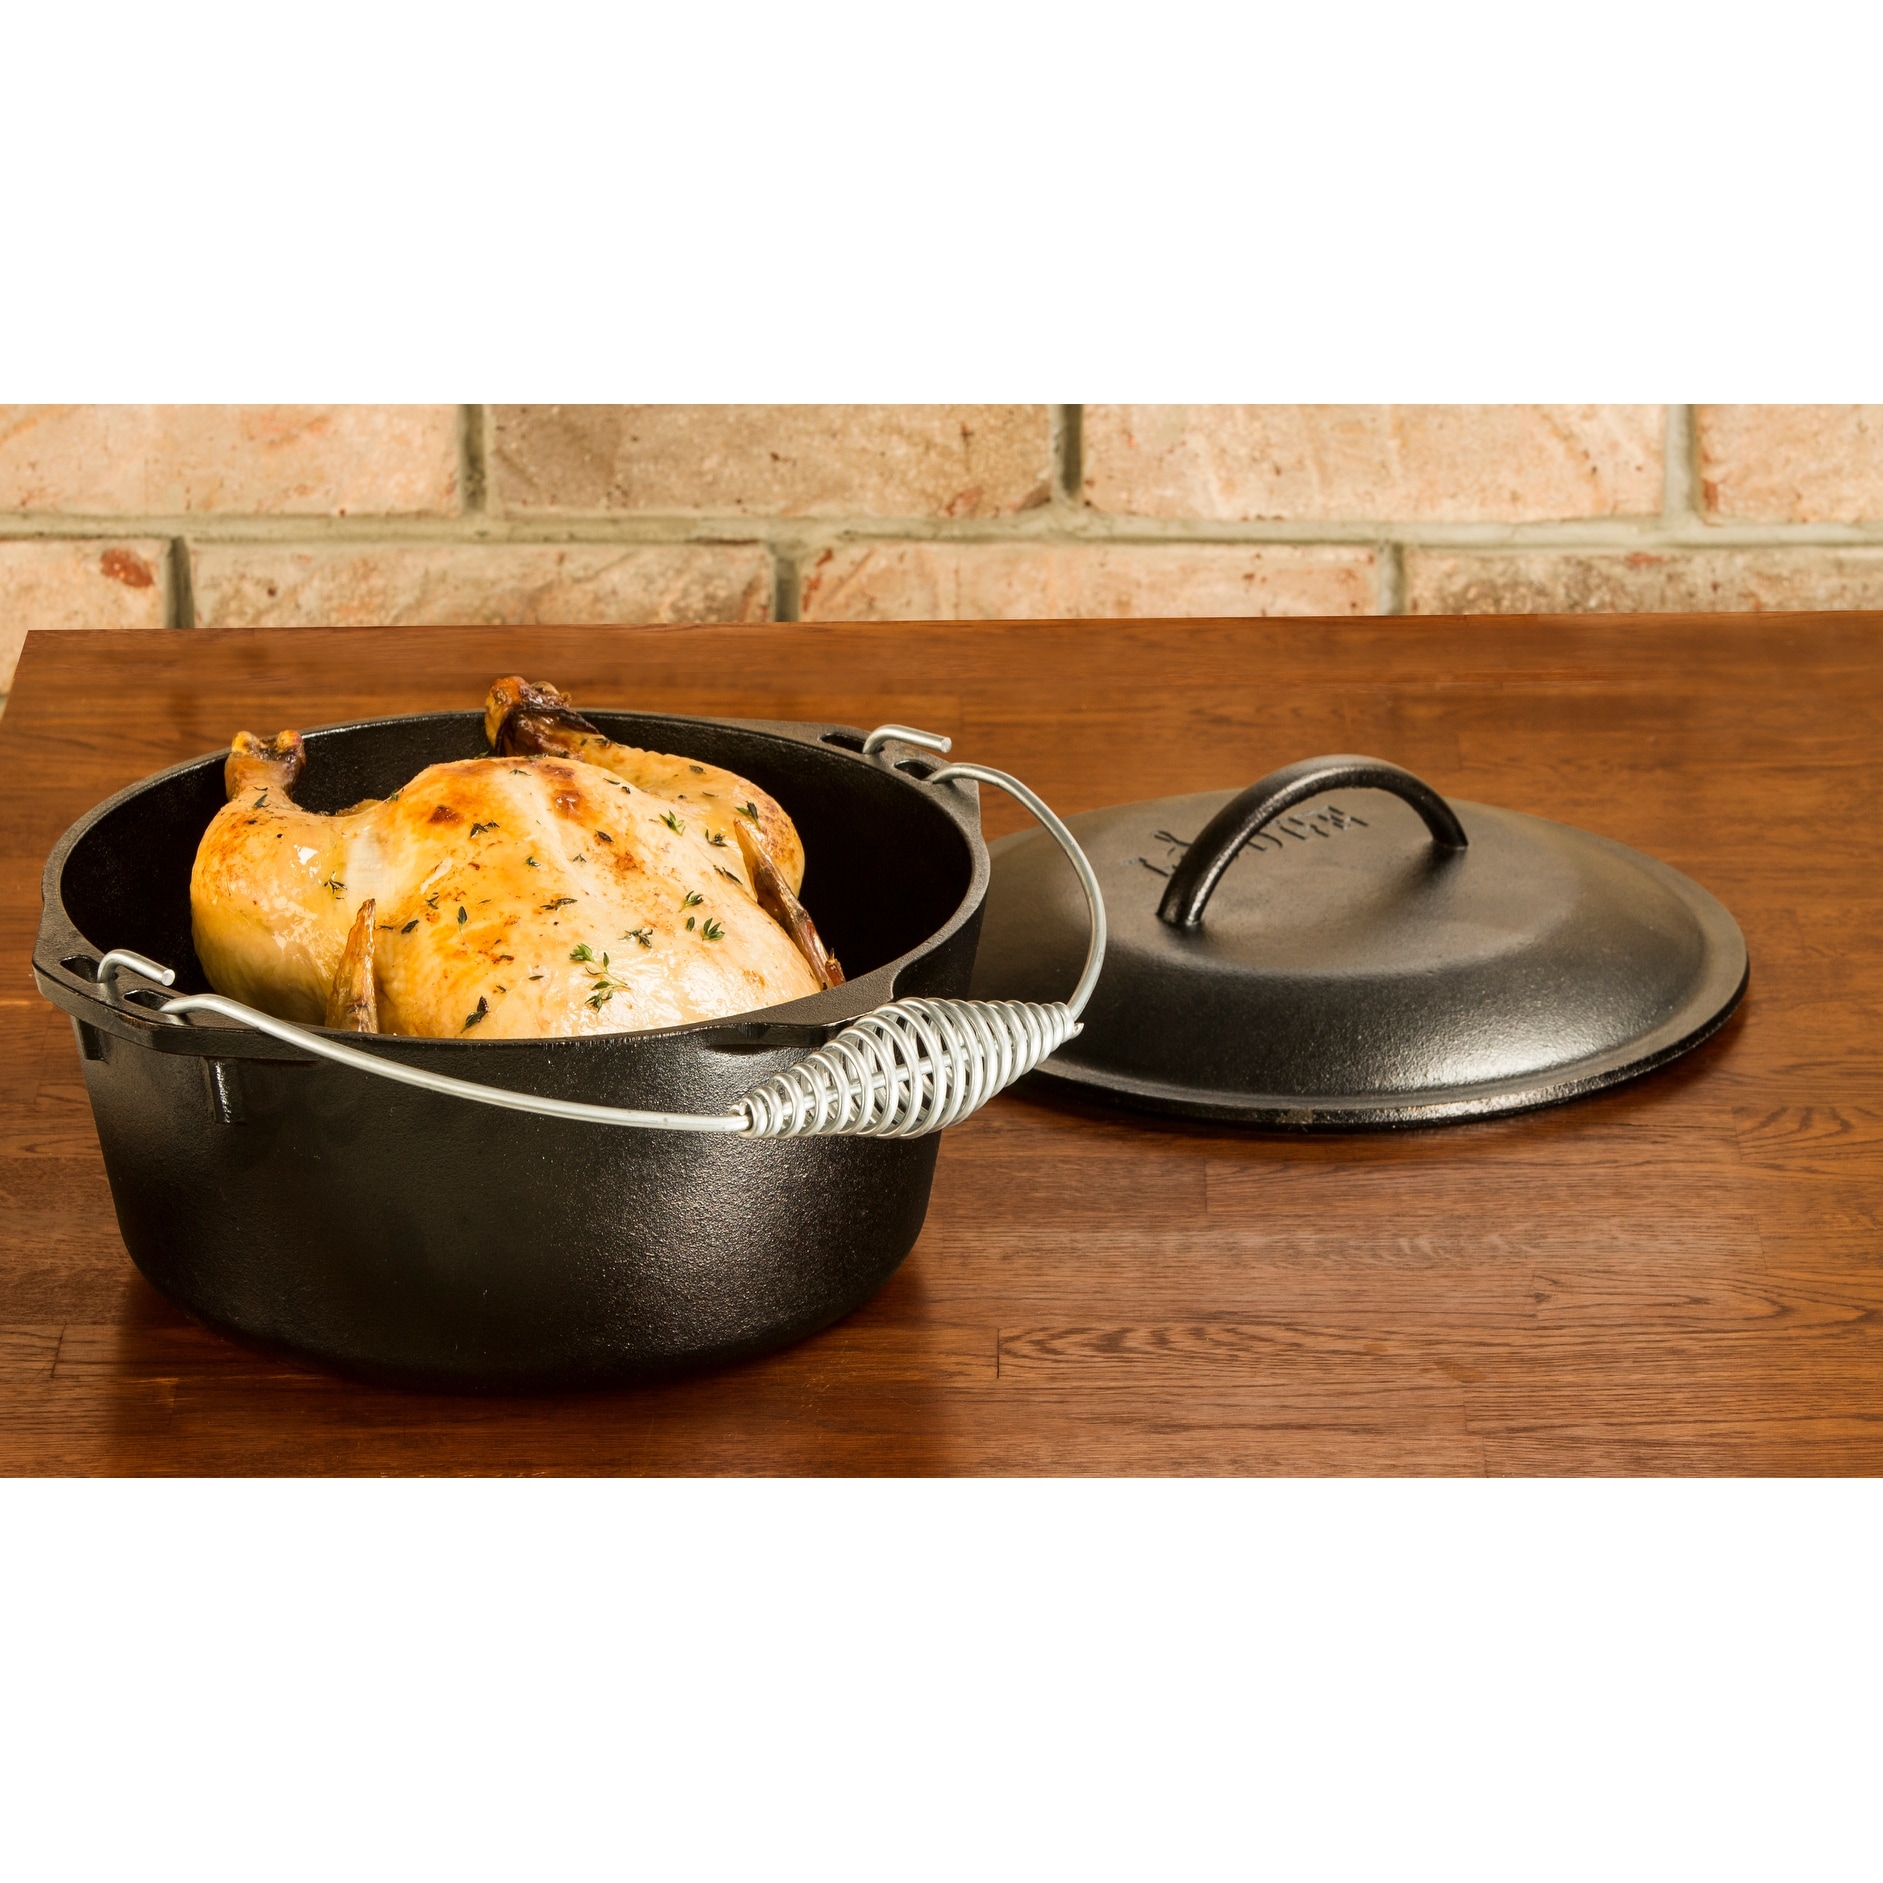 https://ak1.ostkcdn.com/images/products/is/images/direct/3c65137e3a74b177f9d80bdd66a45a9d75d3f33f/7-Quart-Cast-Iron-Dutch-Oven-with-Iron-Cover-L10DO3.jpg